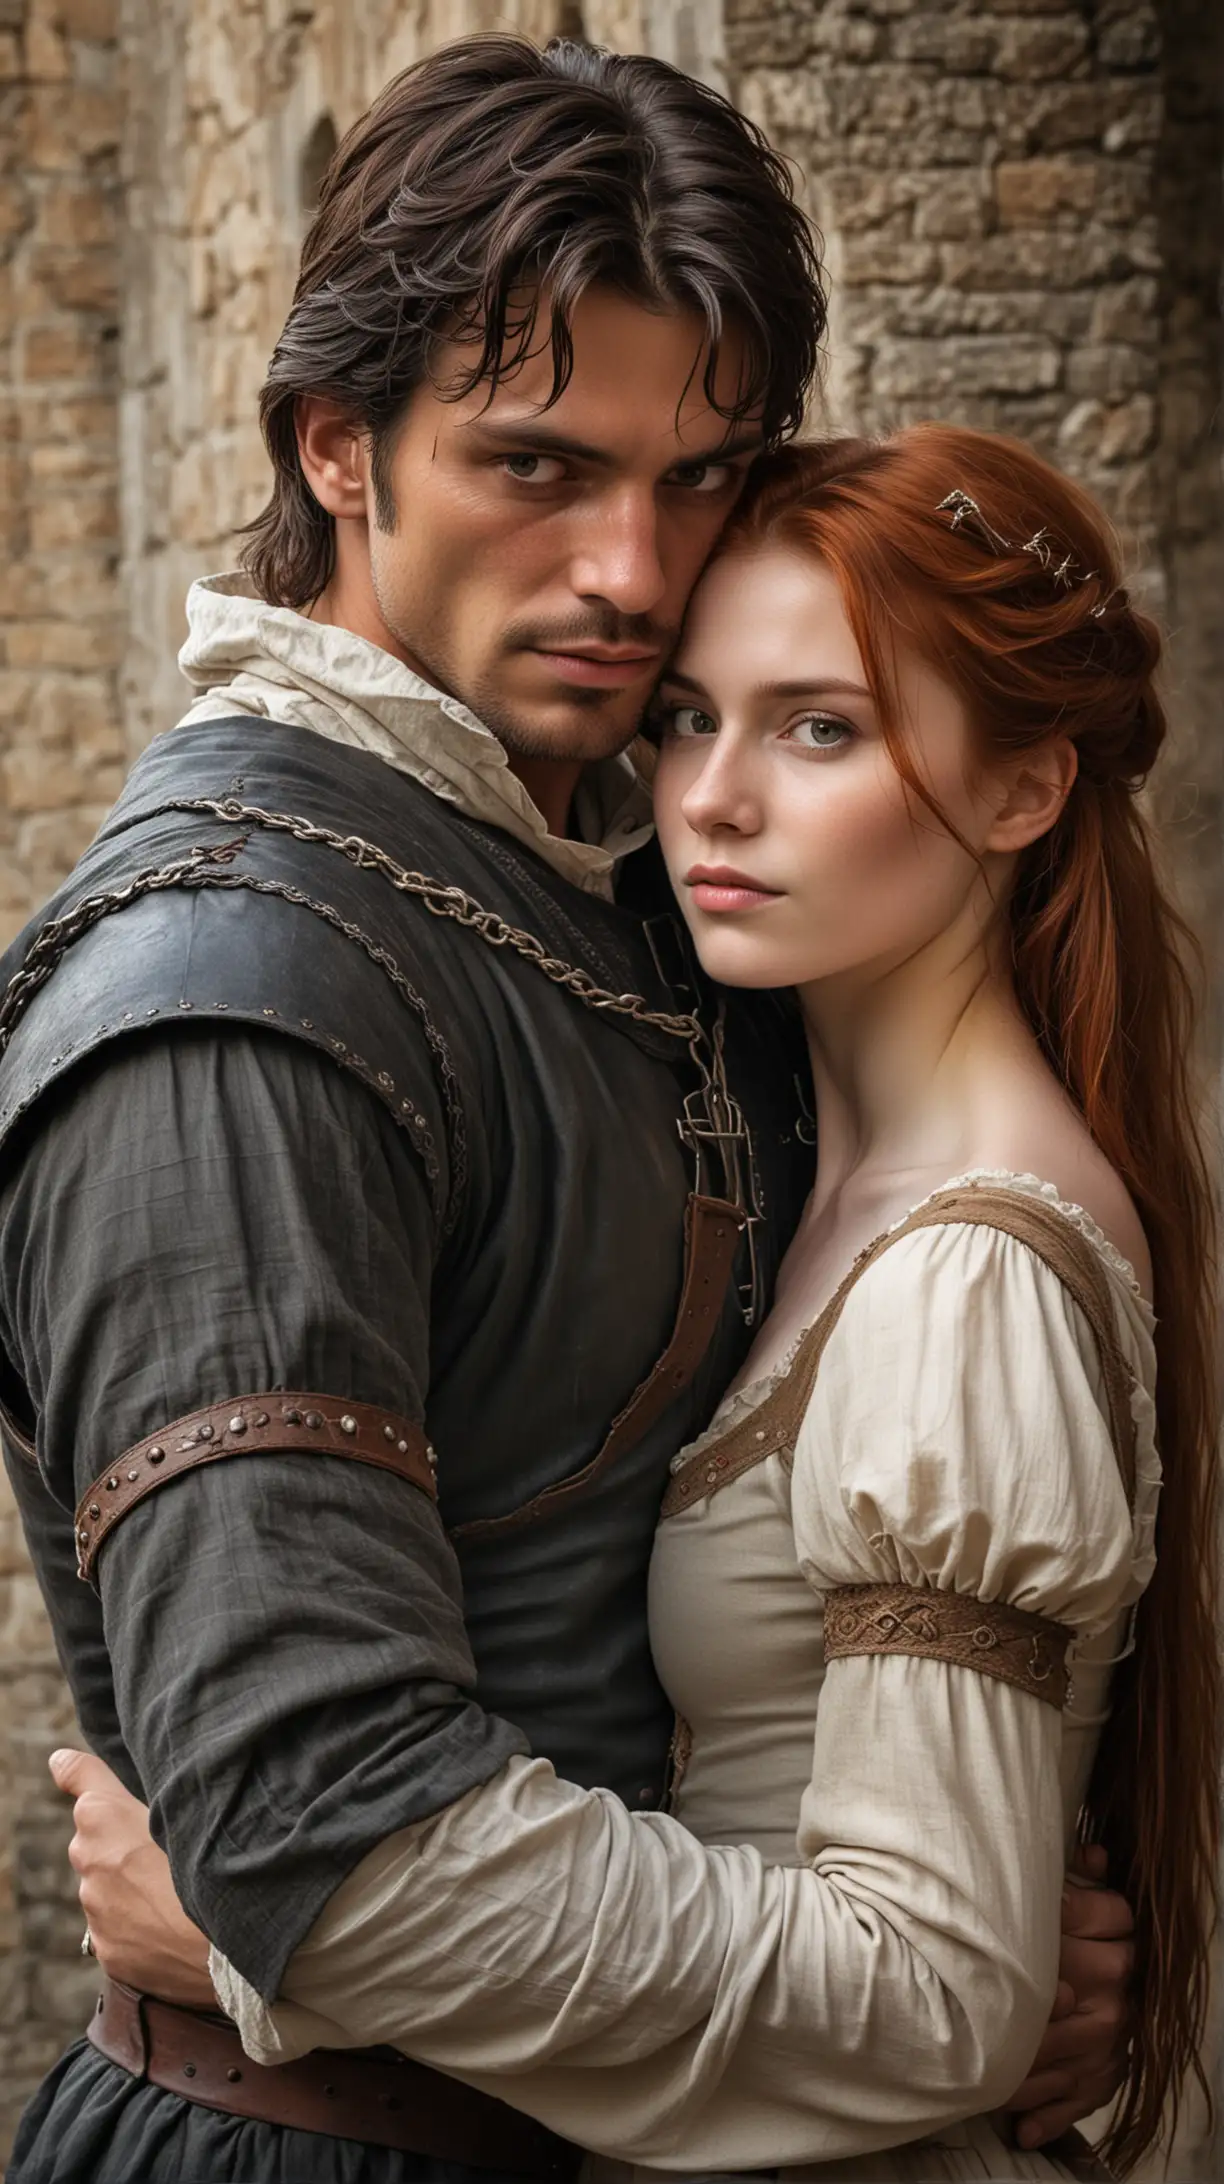 Tall dark haired man, handsome with a scarred face, hugging a shorter, red haired young girl, medieval setting